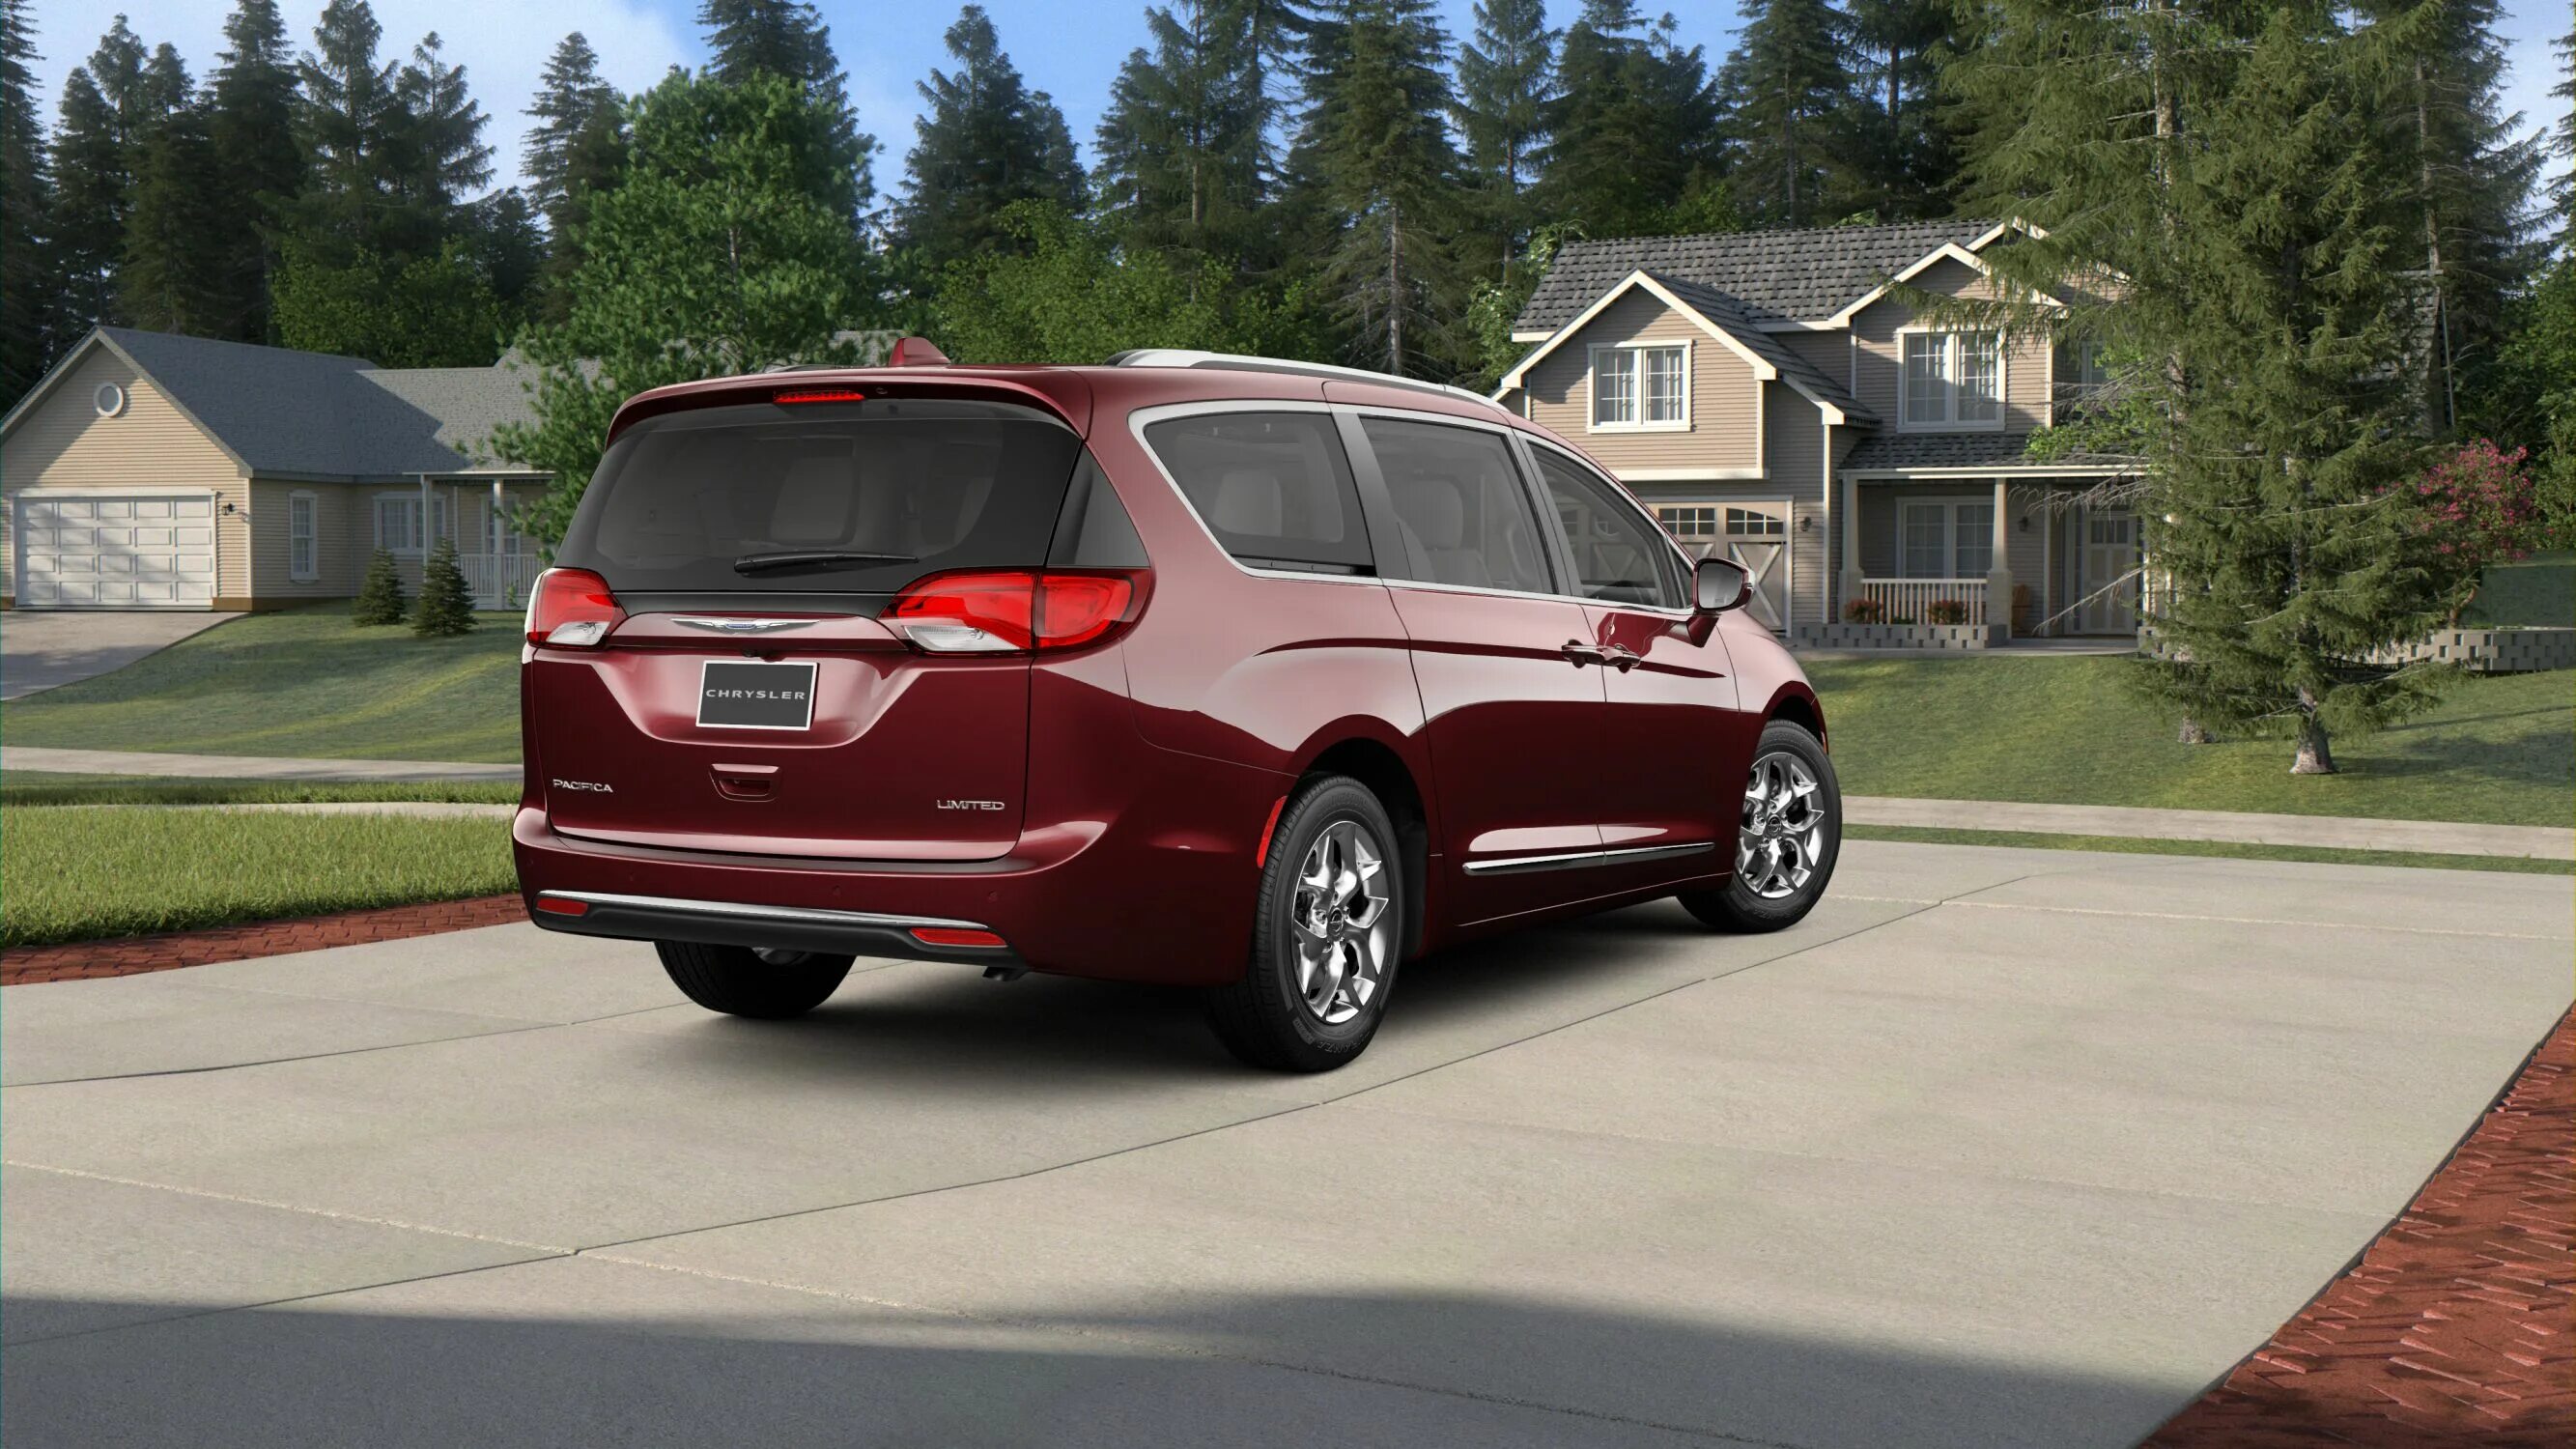 Chrysler Pacifica 2022. Chrysler Pacifica 2019. Крайслер Пацифика 2019. Chrysler Pacifica Limited.